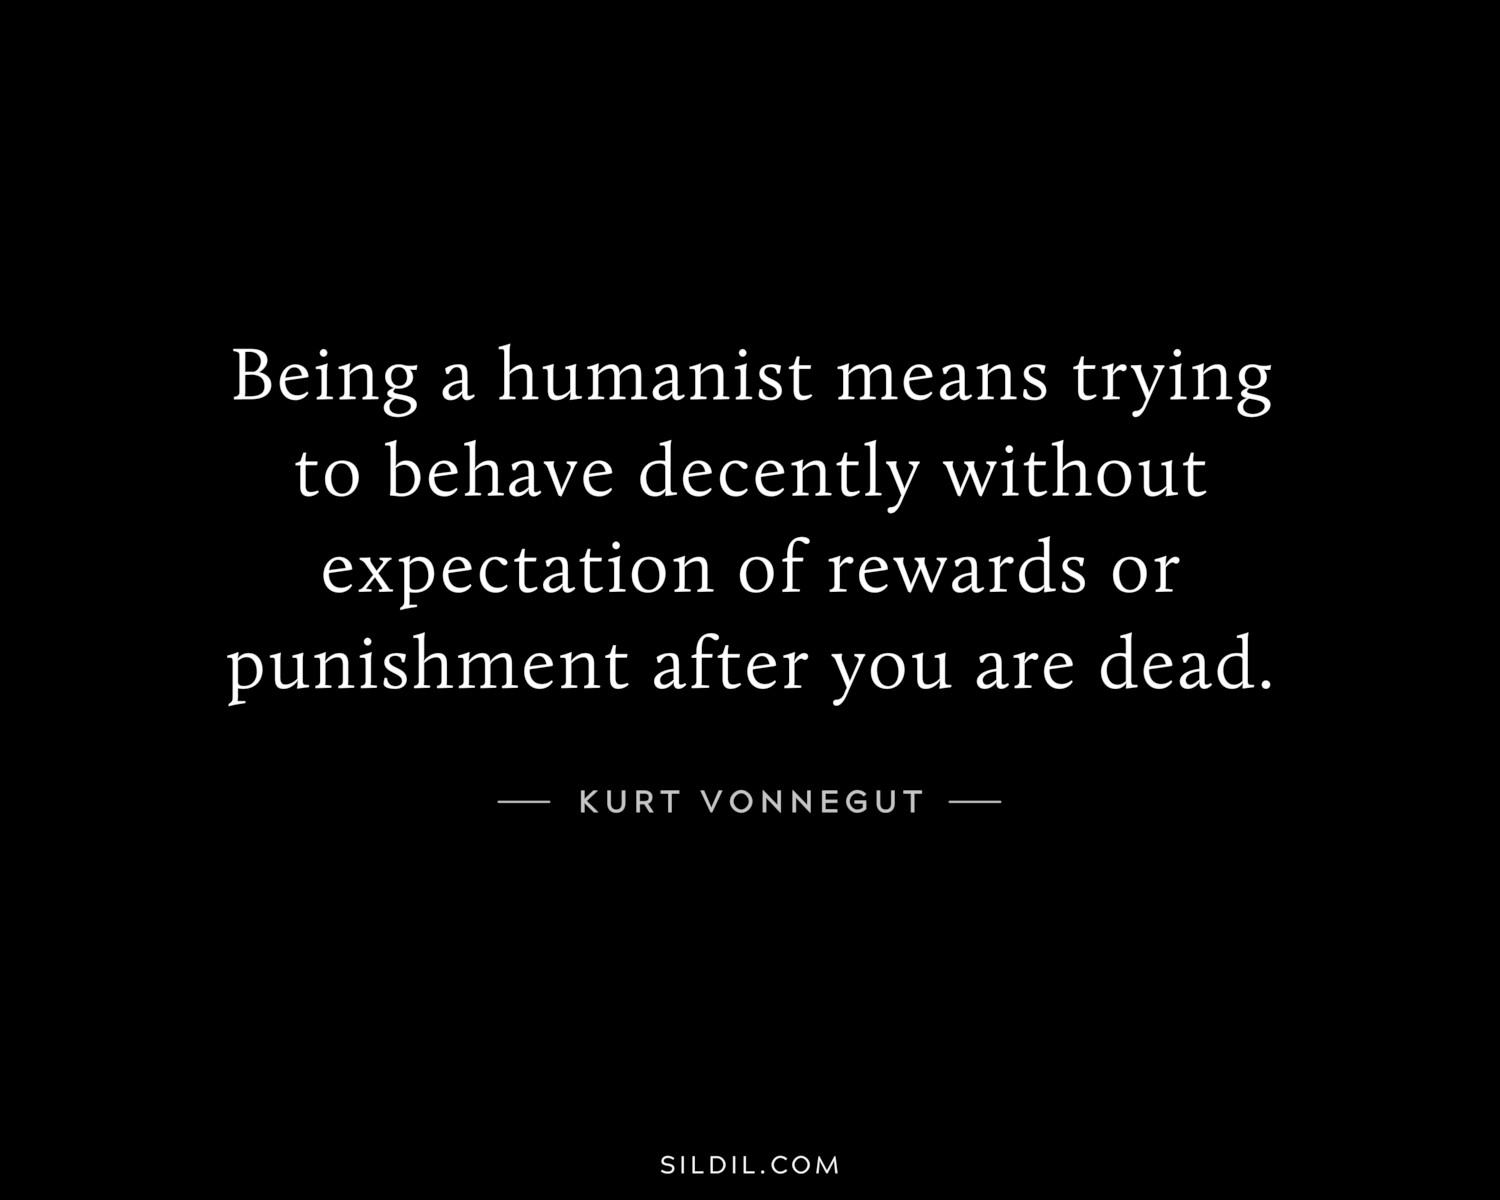 Being a humanist means trying to behave decently without expectation of rewards or punishment after you are dead.